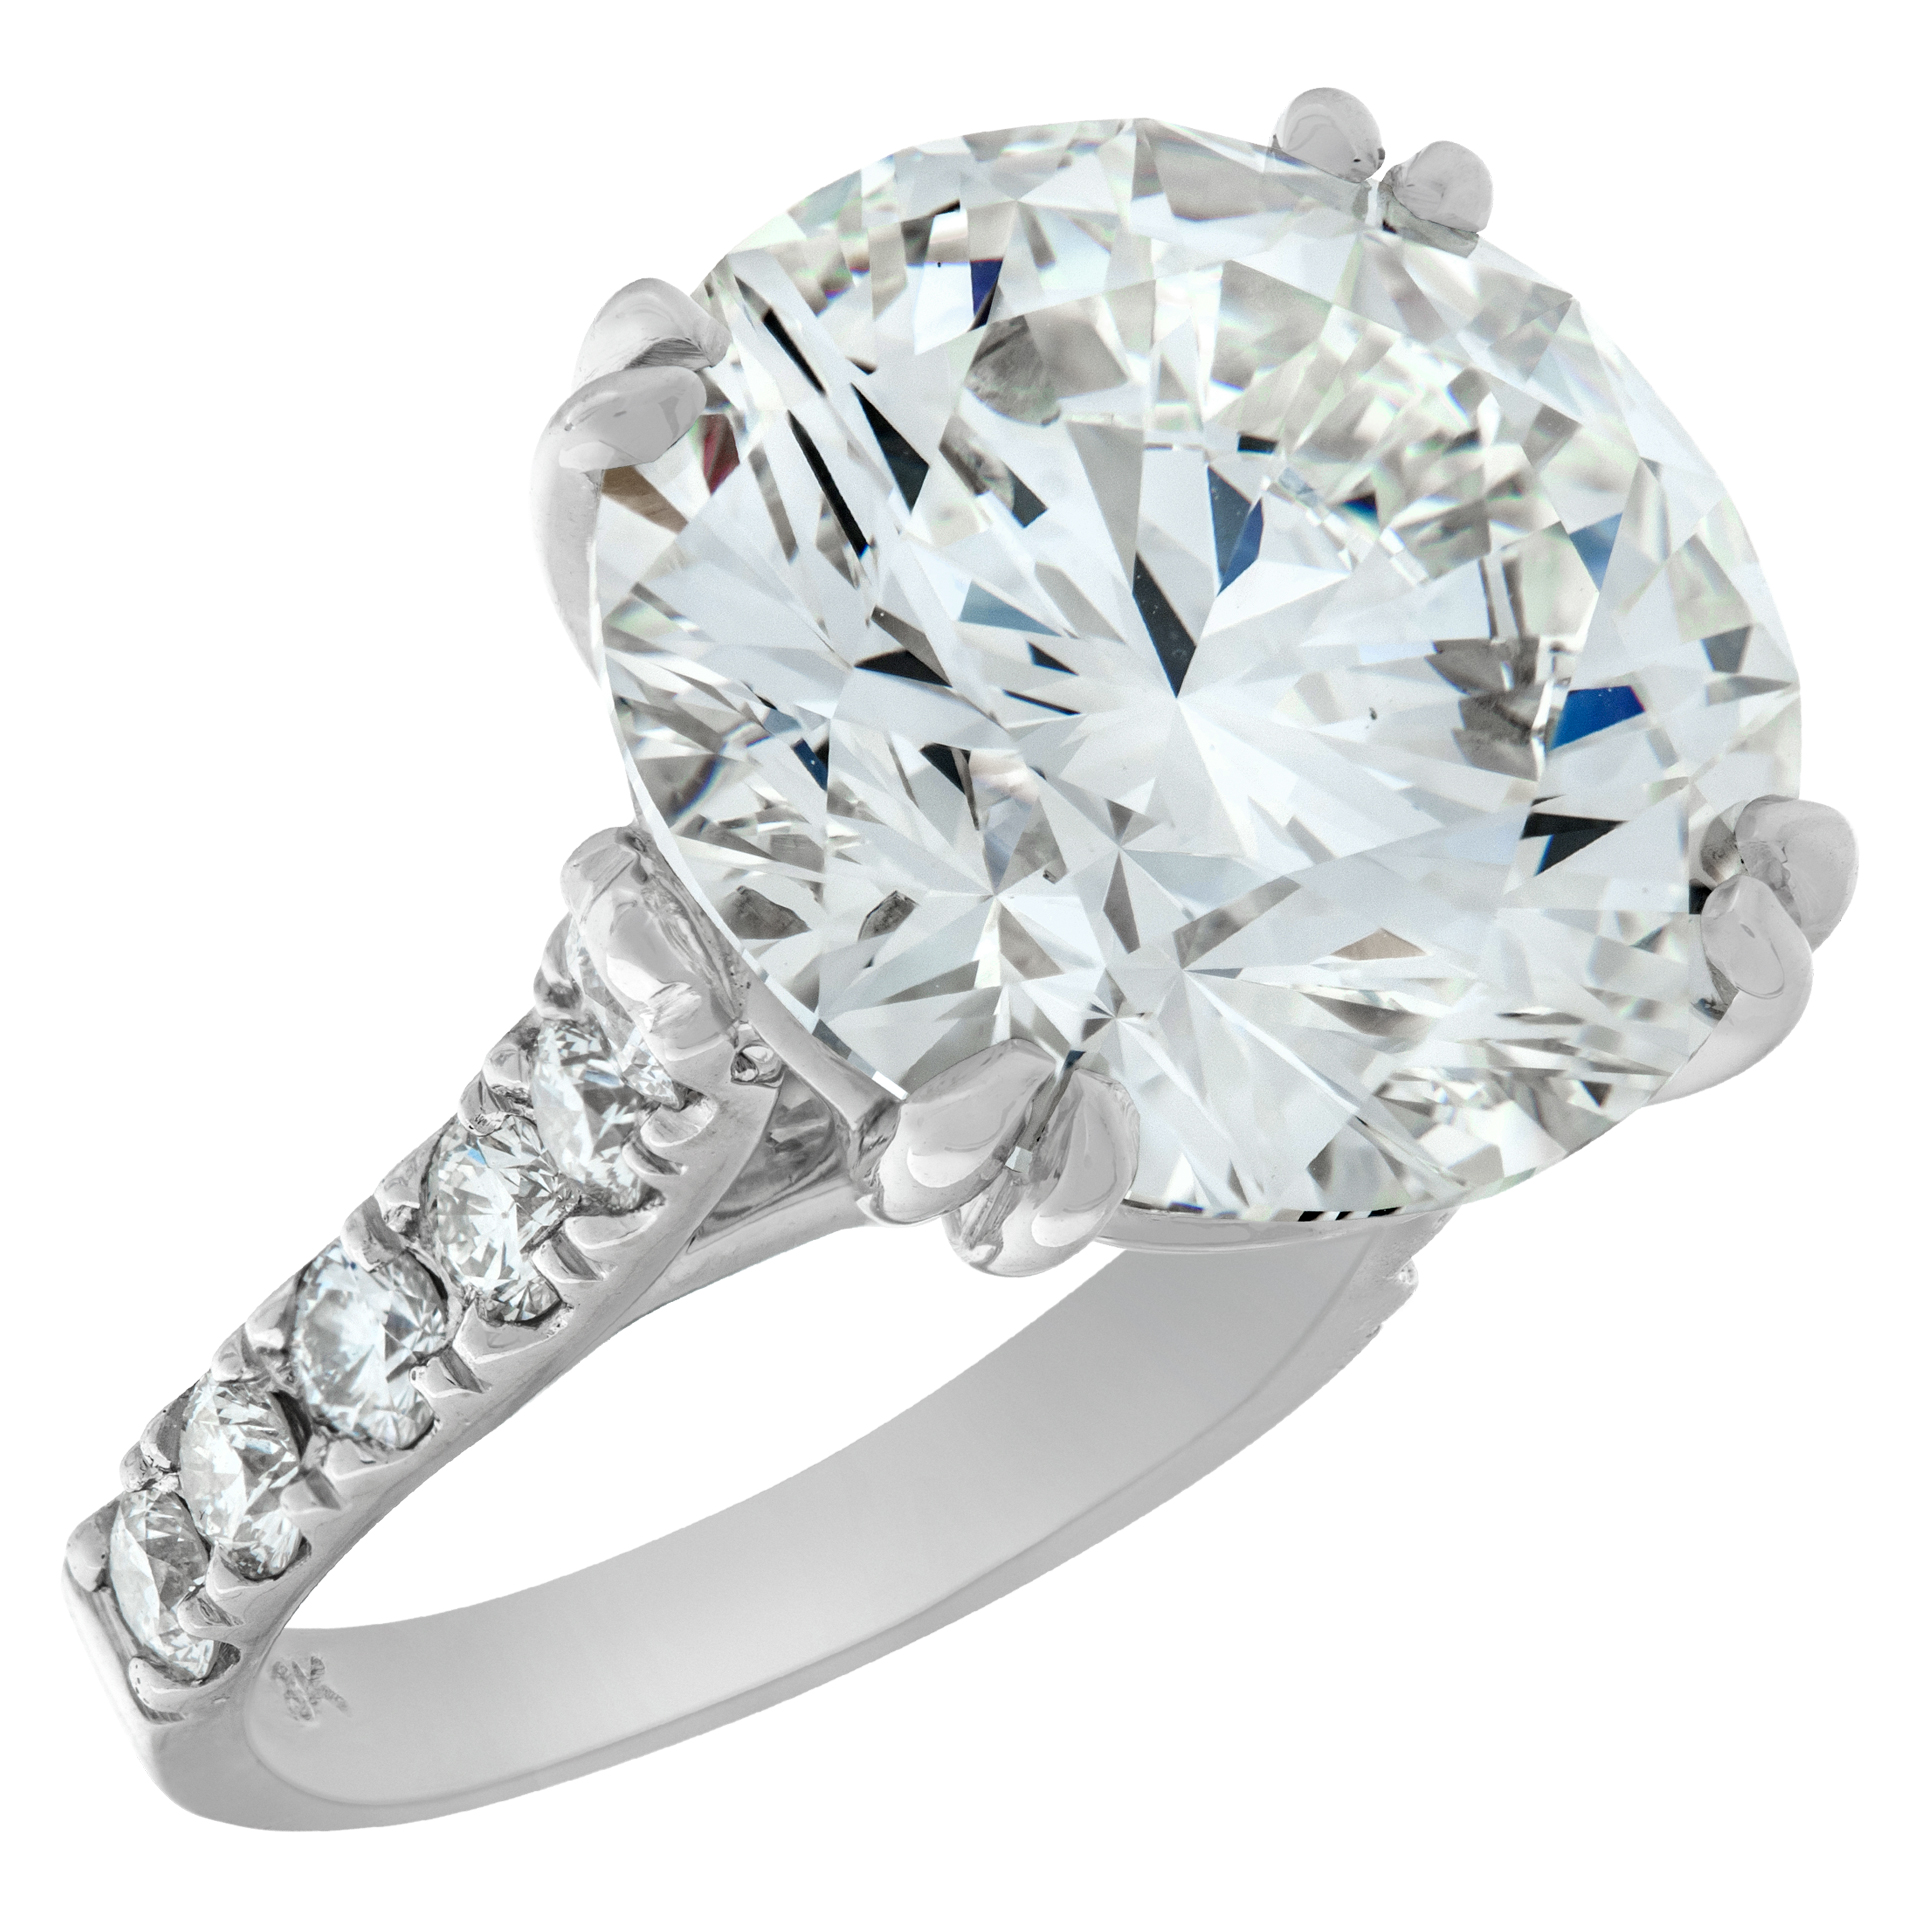 GIA Certified 16.92 carats round brilliant cut diamond set in 18K diamonds white gold ring. I color, image 4